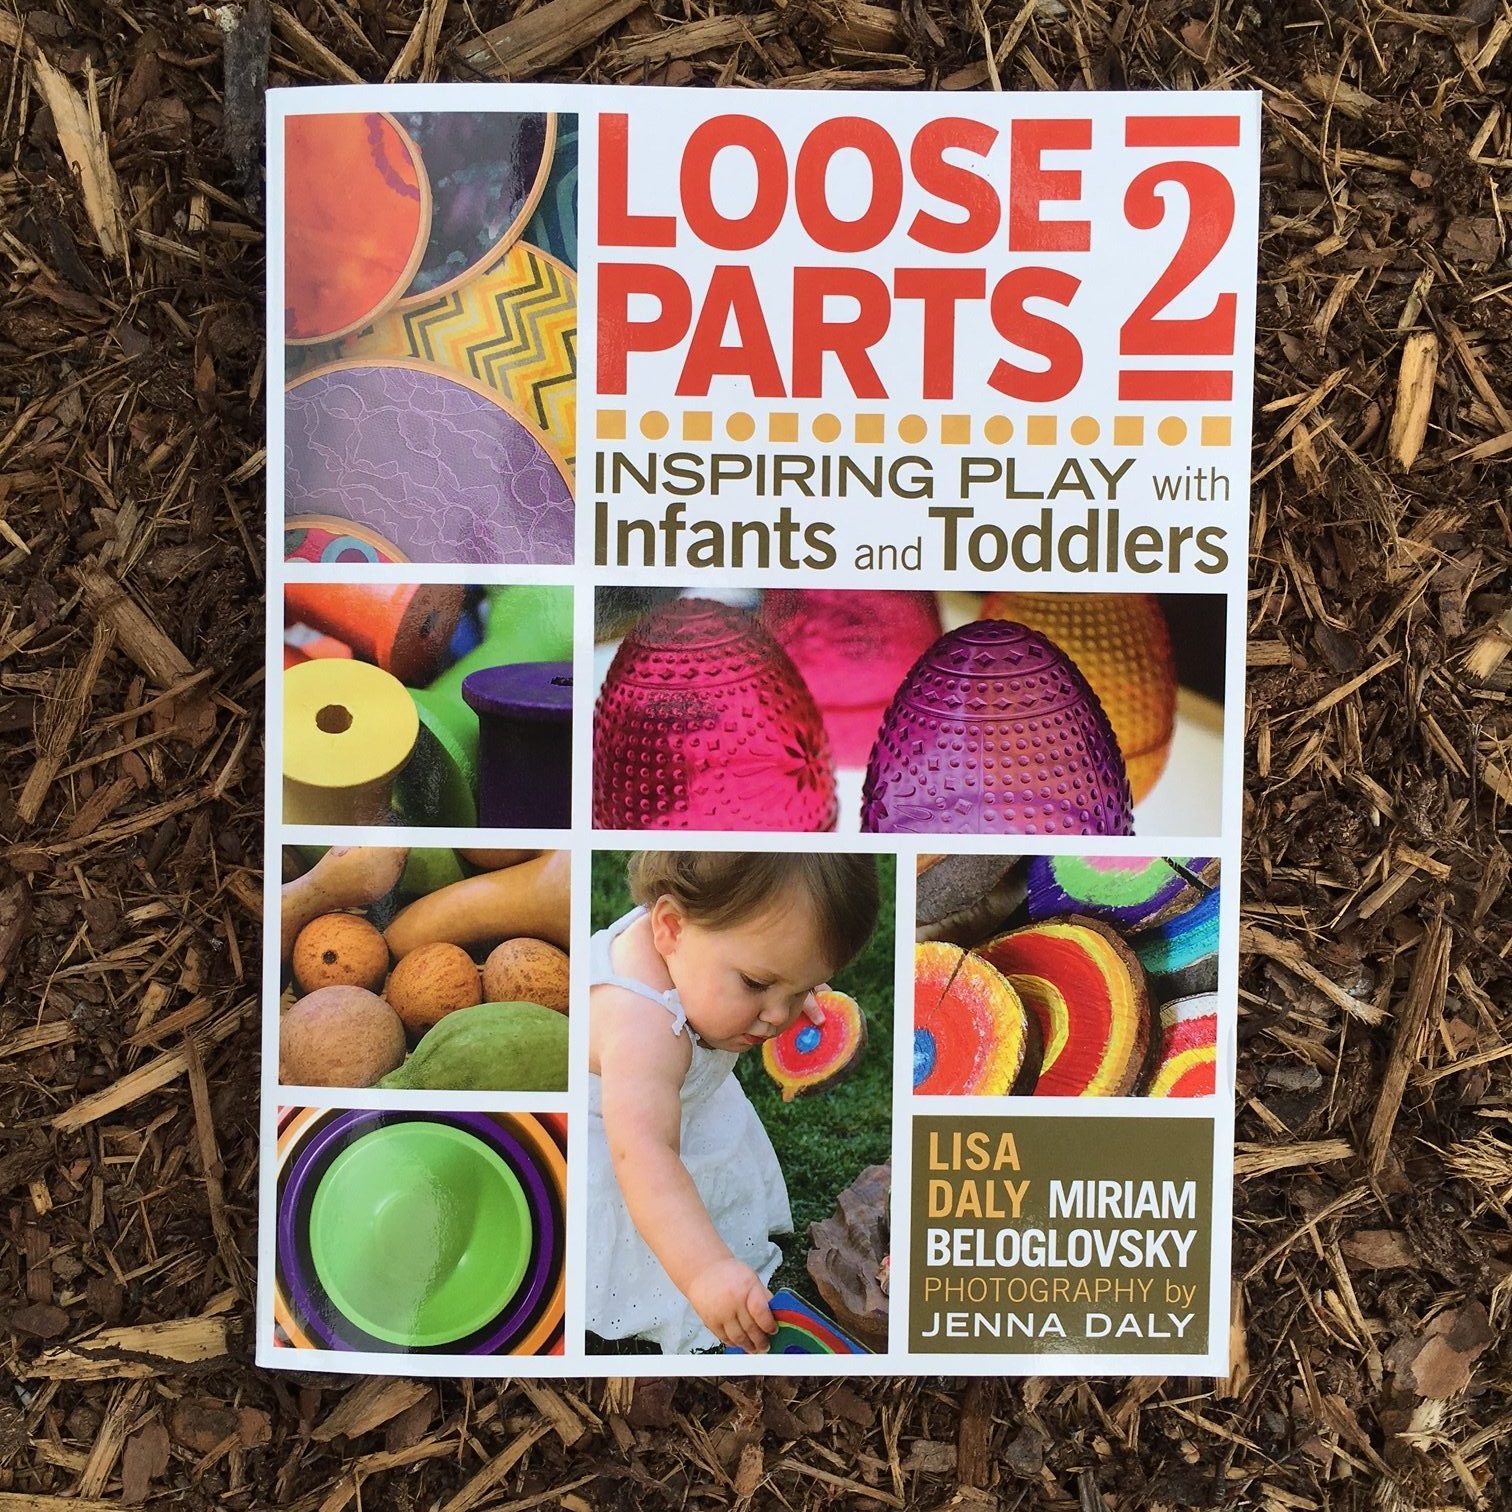 Loose Parts 2 - Inspiring Play with Infants and Toddlers